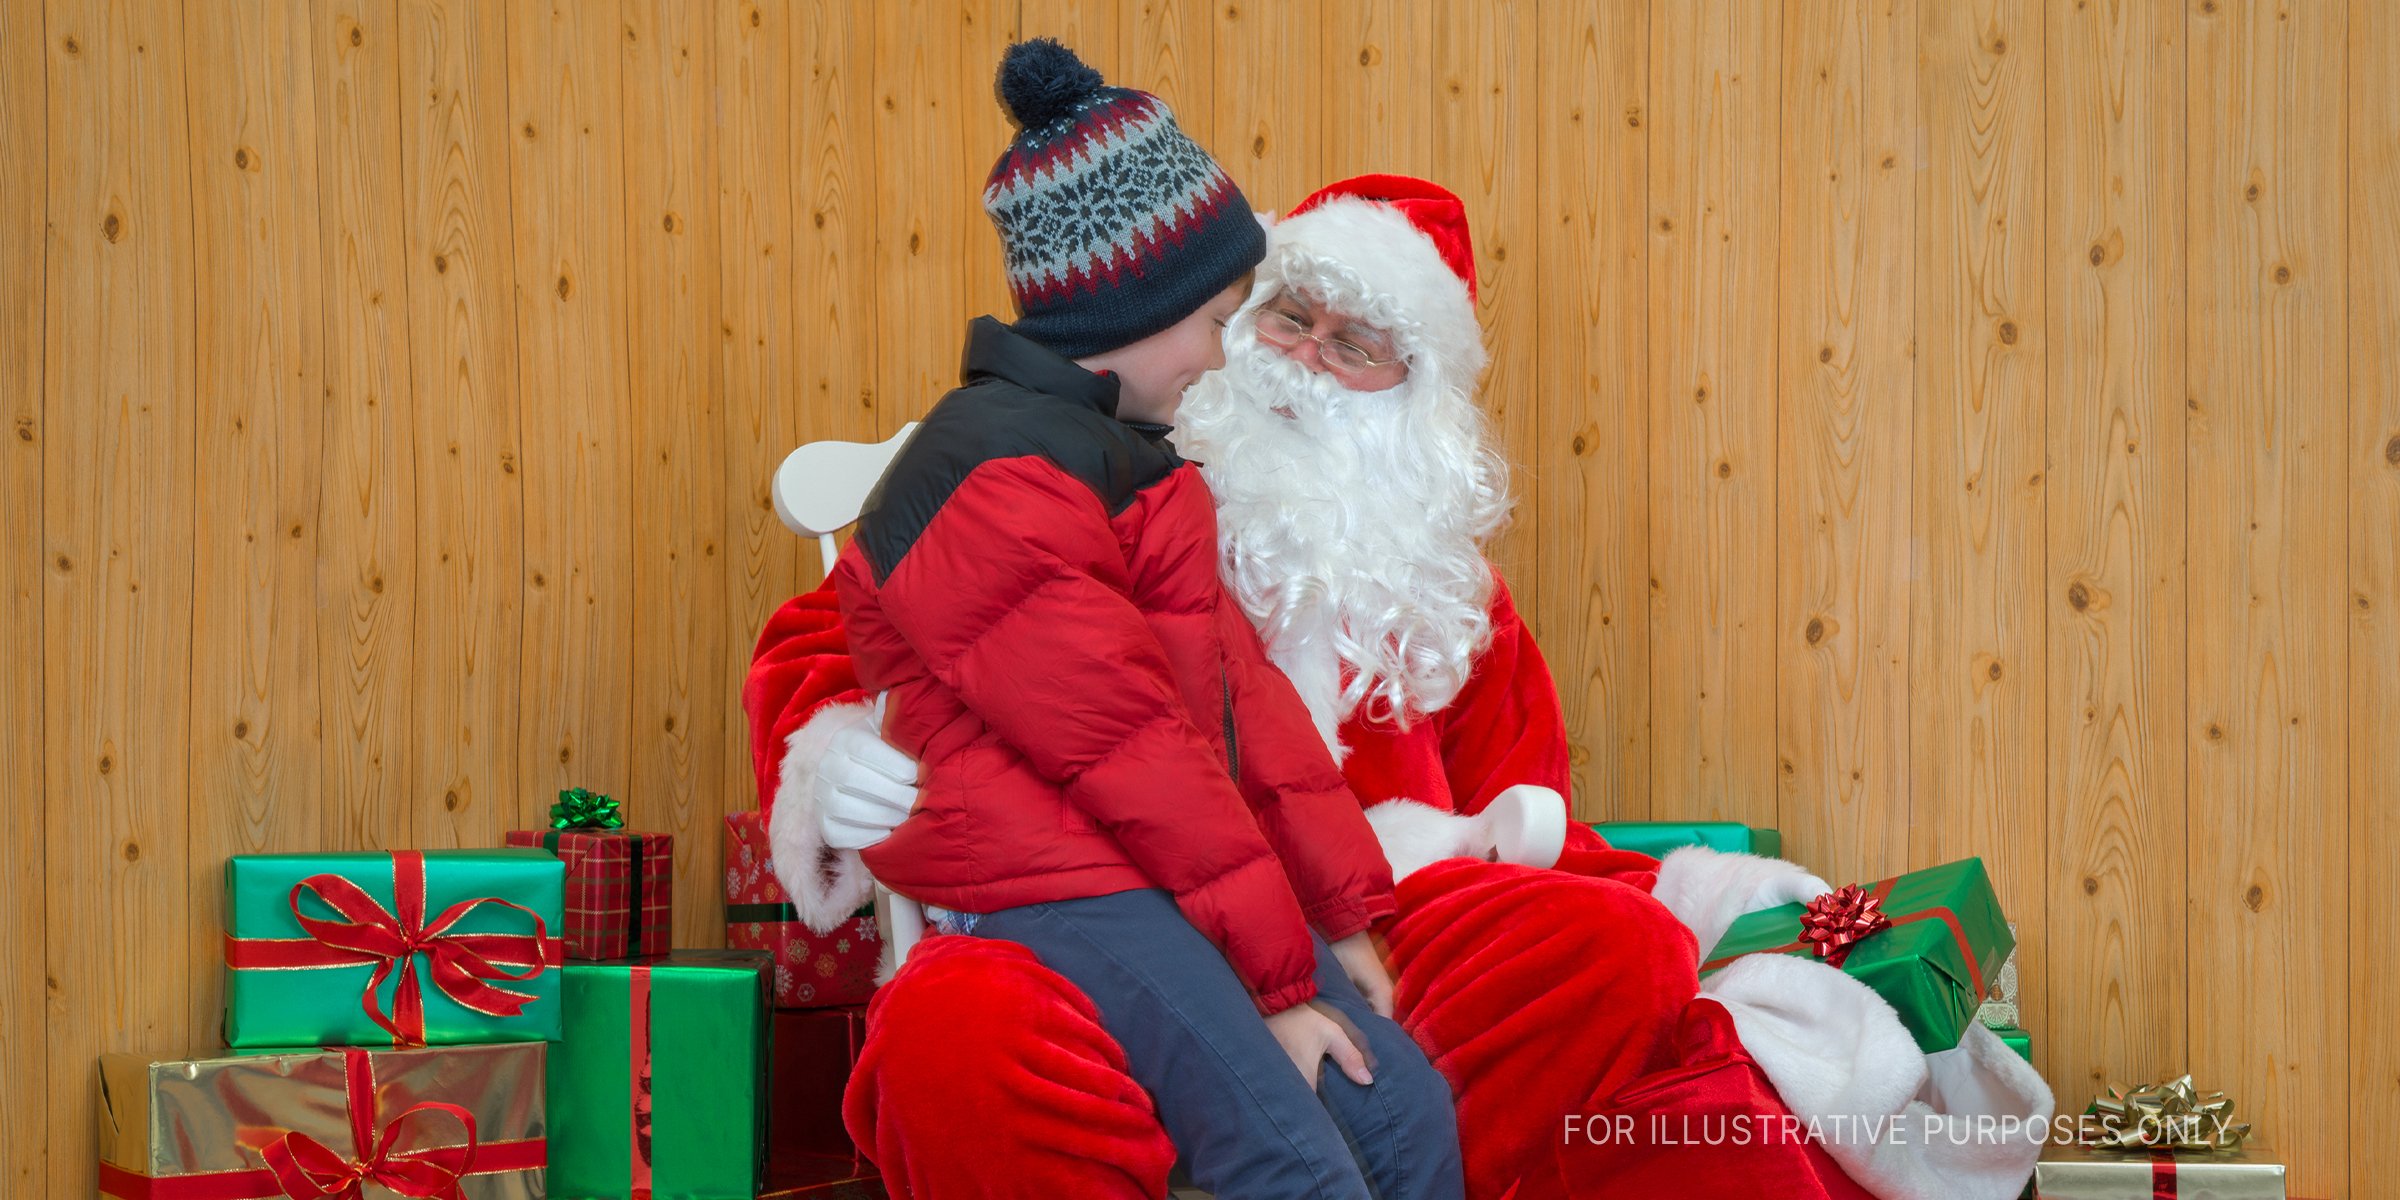 Santa sitting with boy | Source: Getty Images